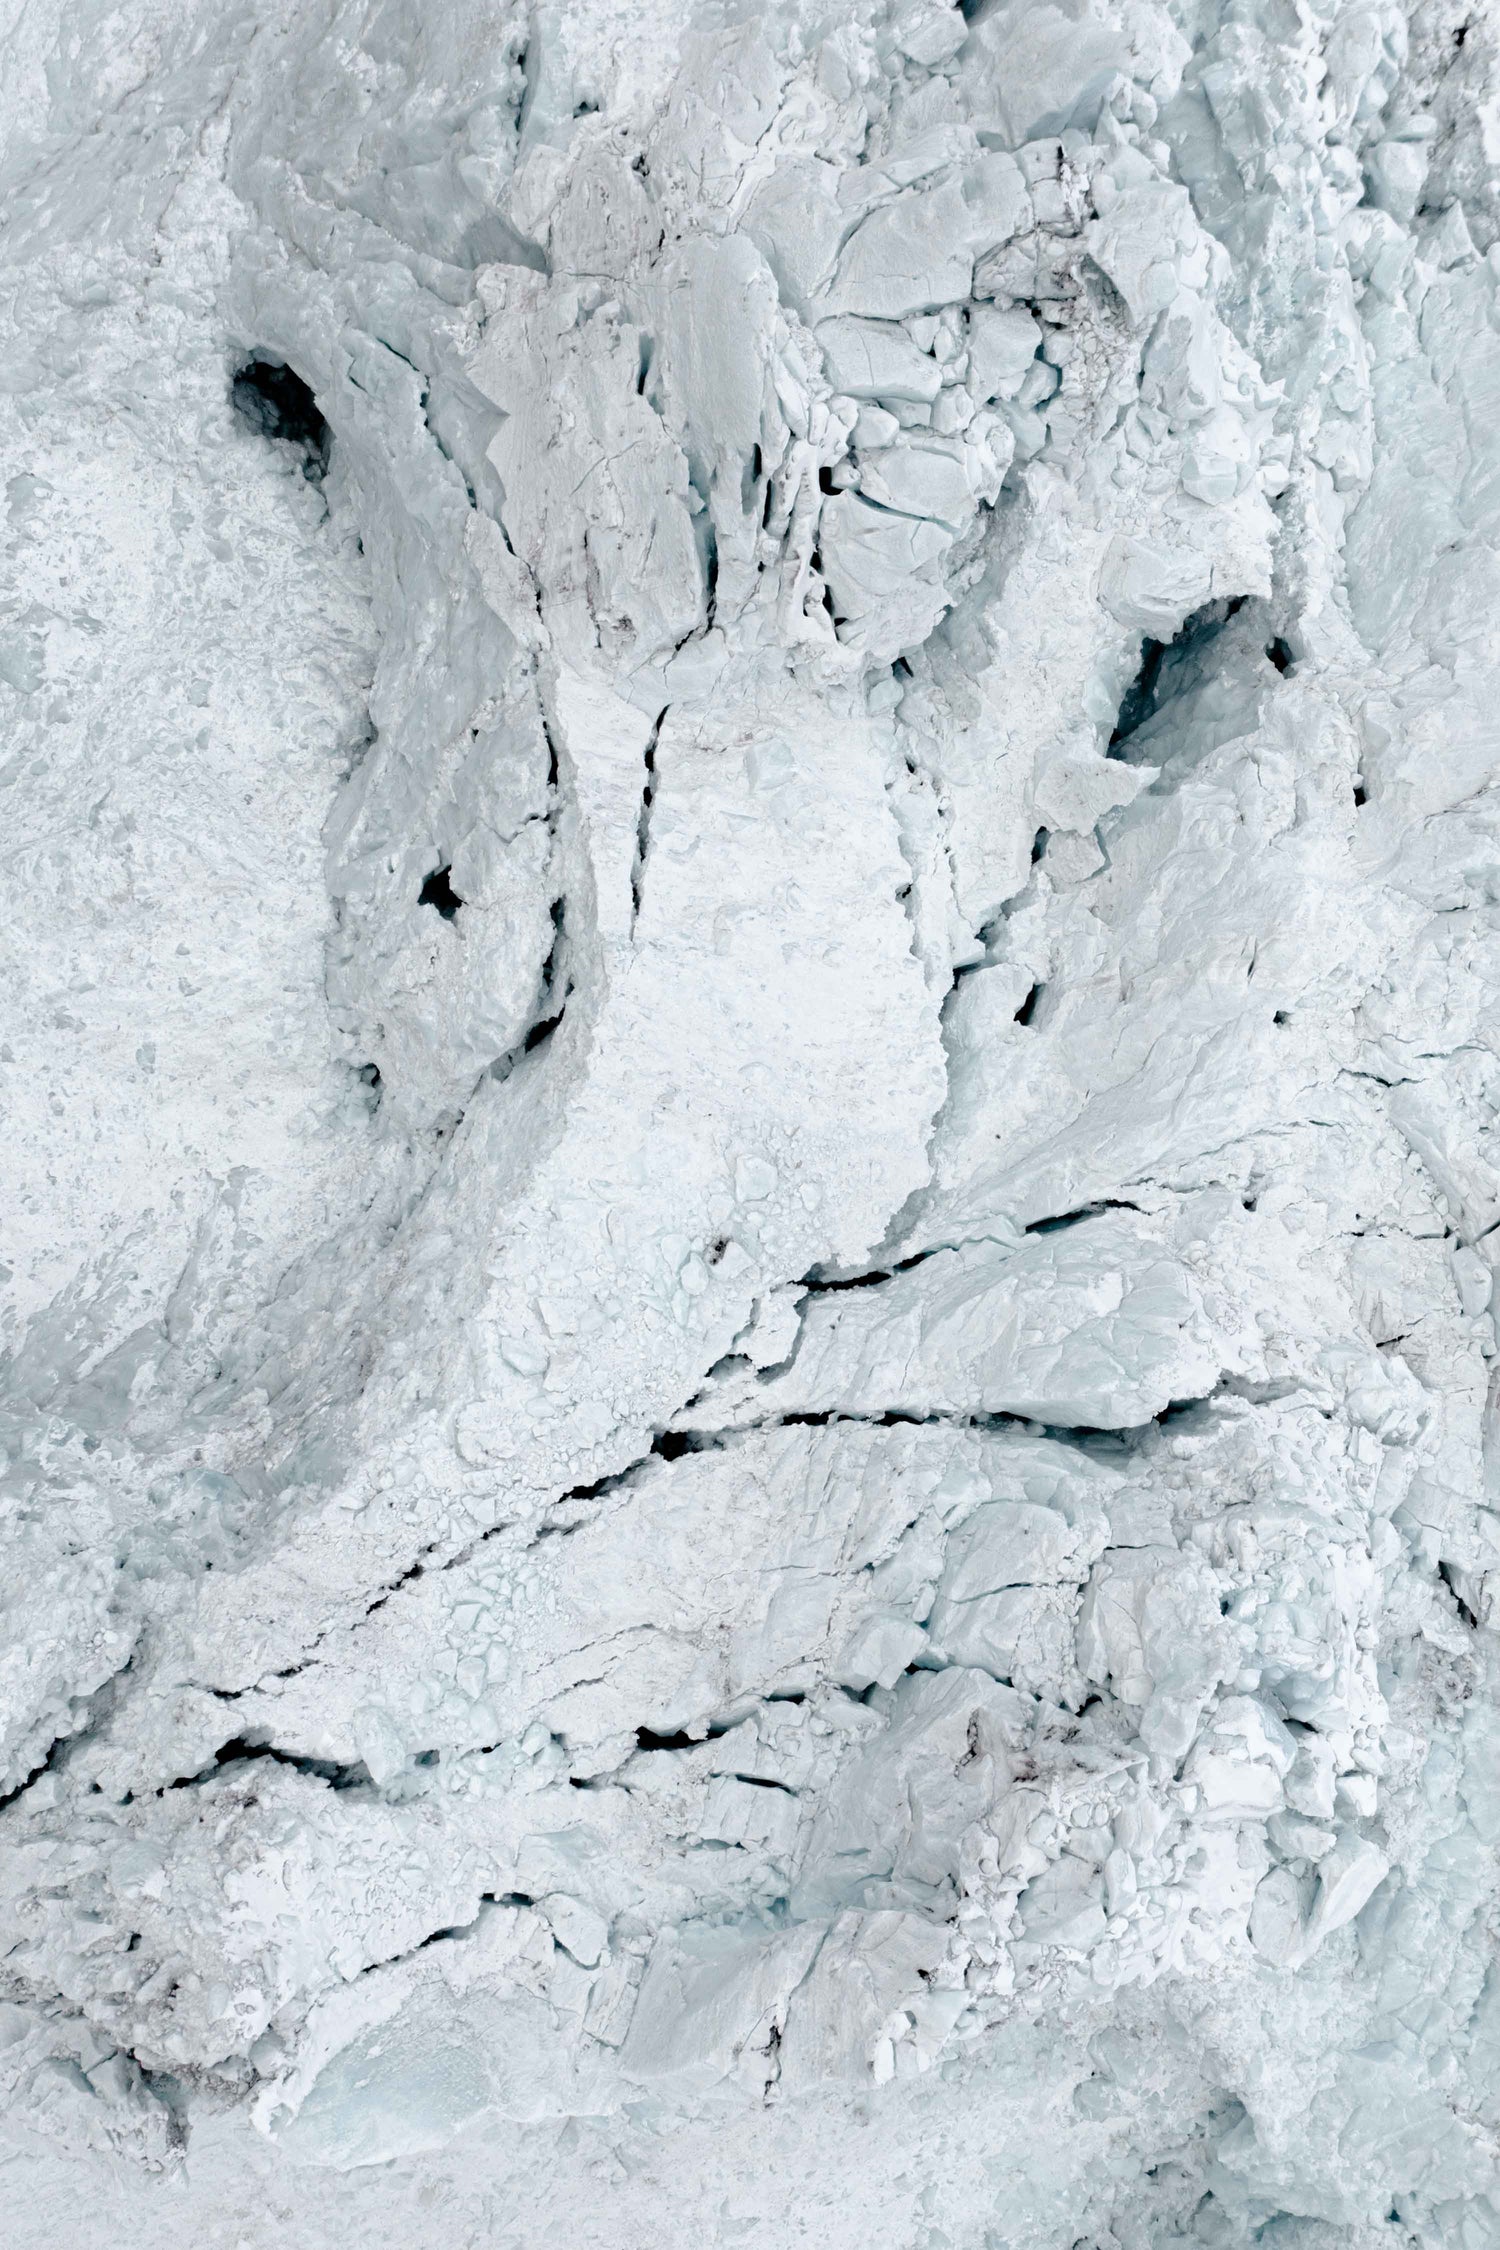 Glacial crack patterns created over time